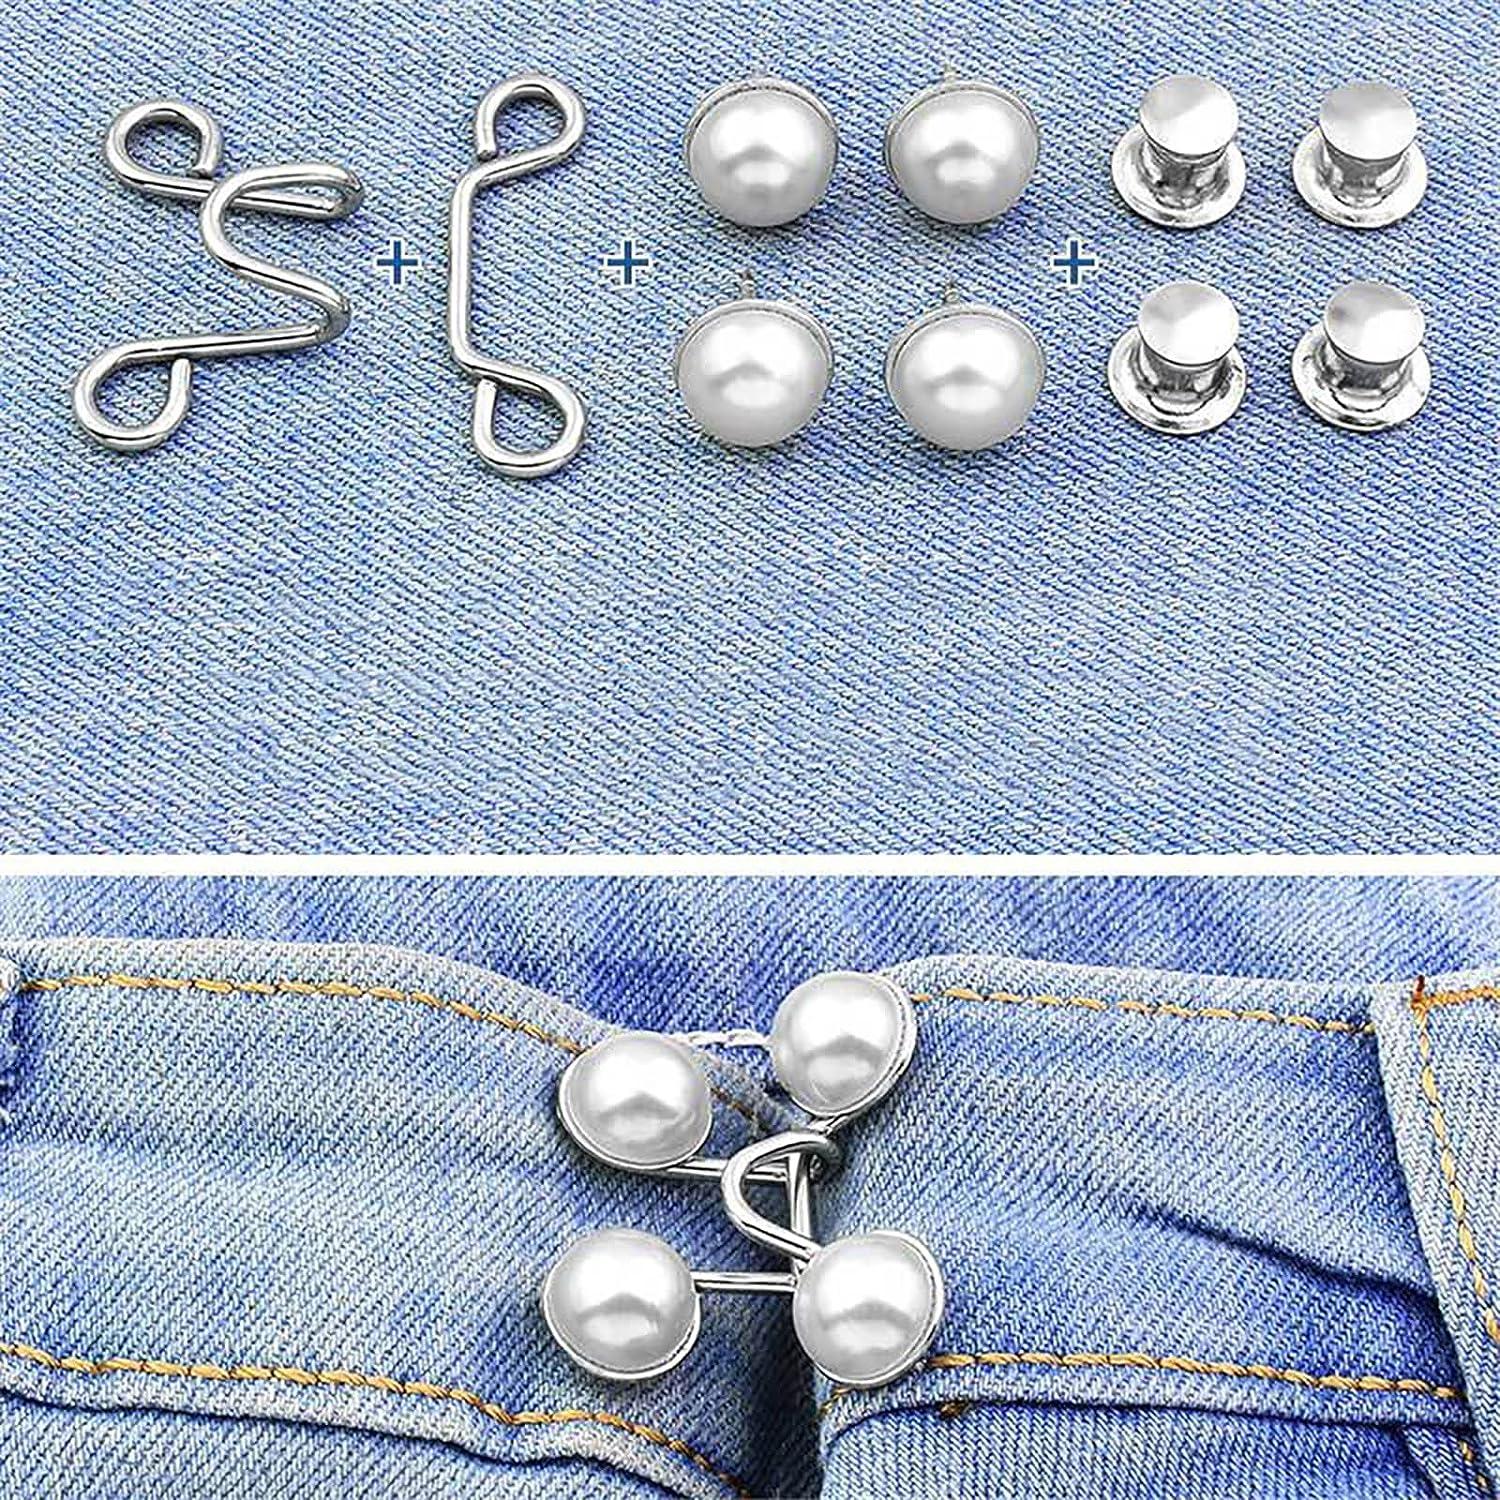 8 Sets Pant Waist Tightener Button Pins for Jeans Too Big Jeans Button  Tightener Waist Adjuster for Pants Waistband Tightener Pants Clips